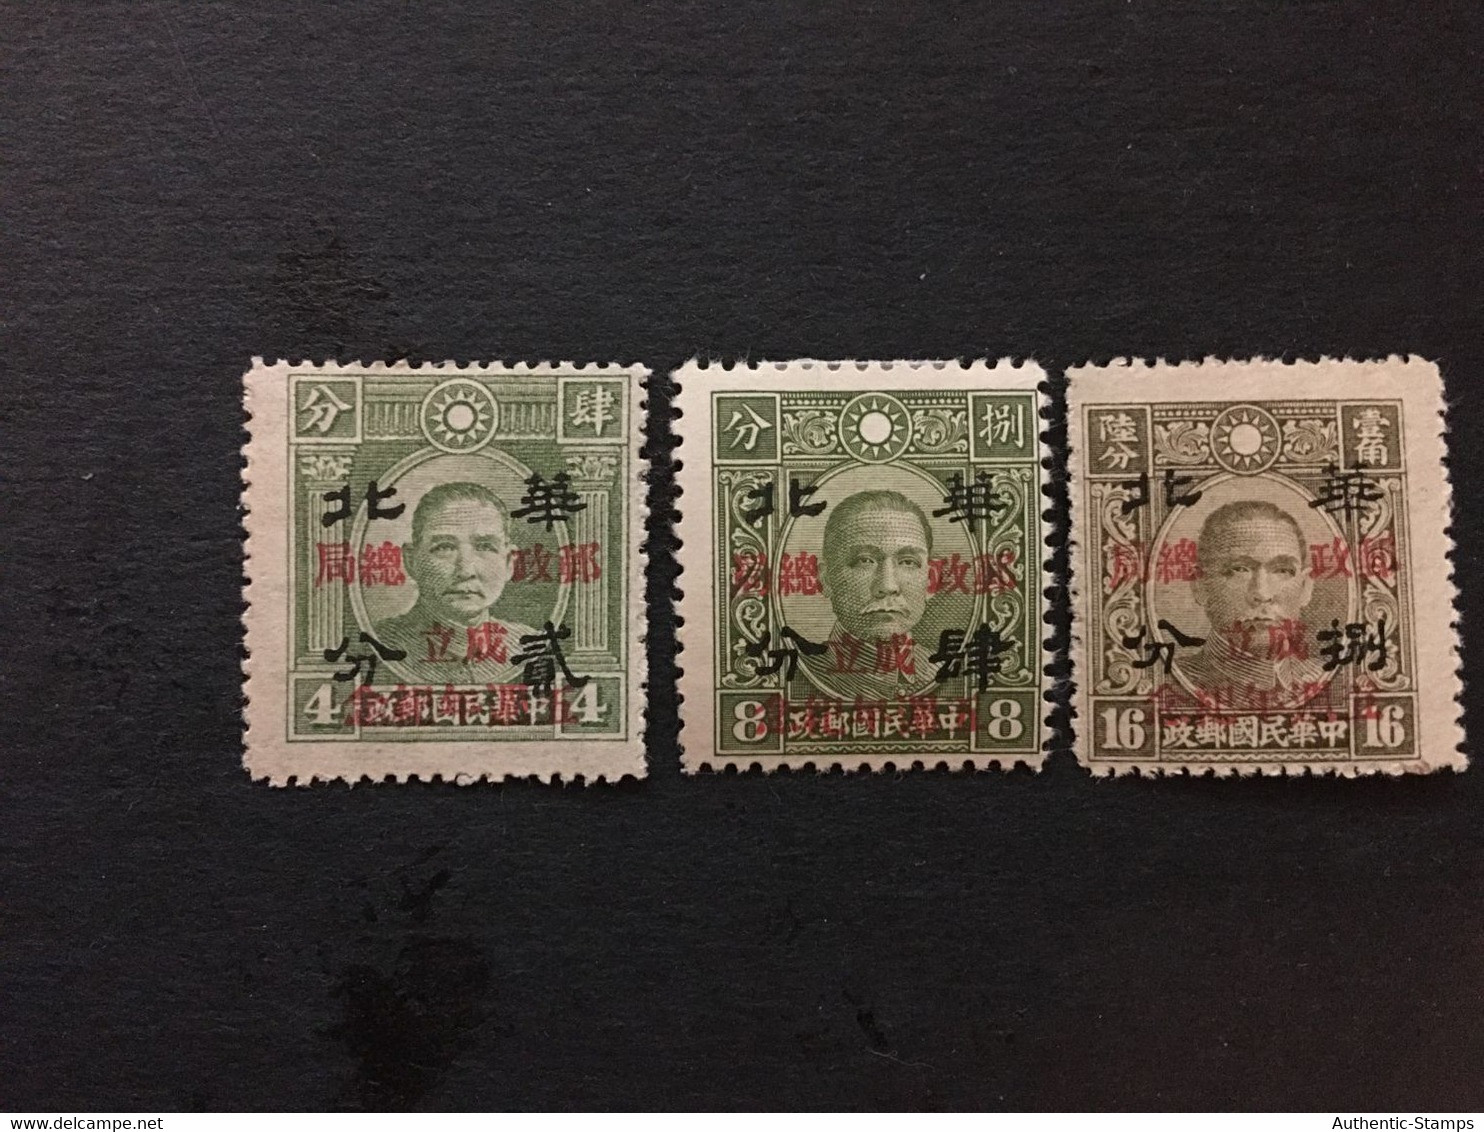 1943 CHINA  STAMP Set,5th Anniversary Of D.G Of Posts, Rare Overprint, Japanese Occupation, MLH, CINA, CHINE,  LIST 1067 - 1941-45 Chine Du Nord